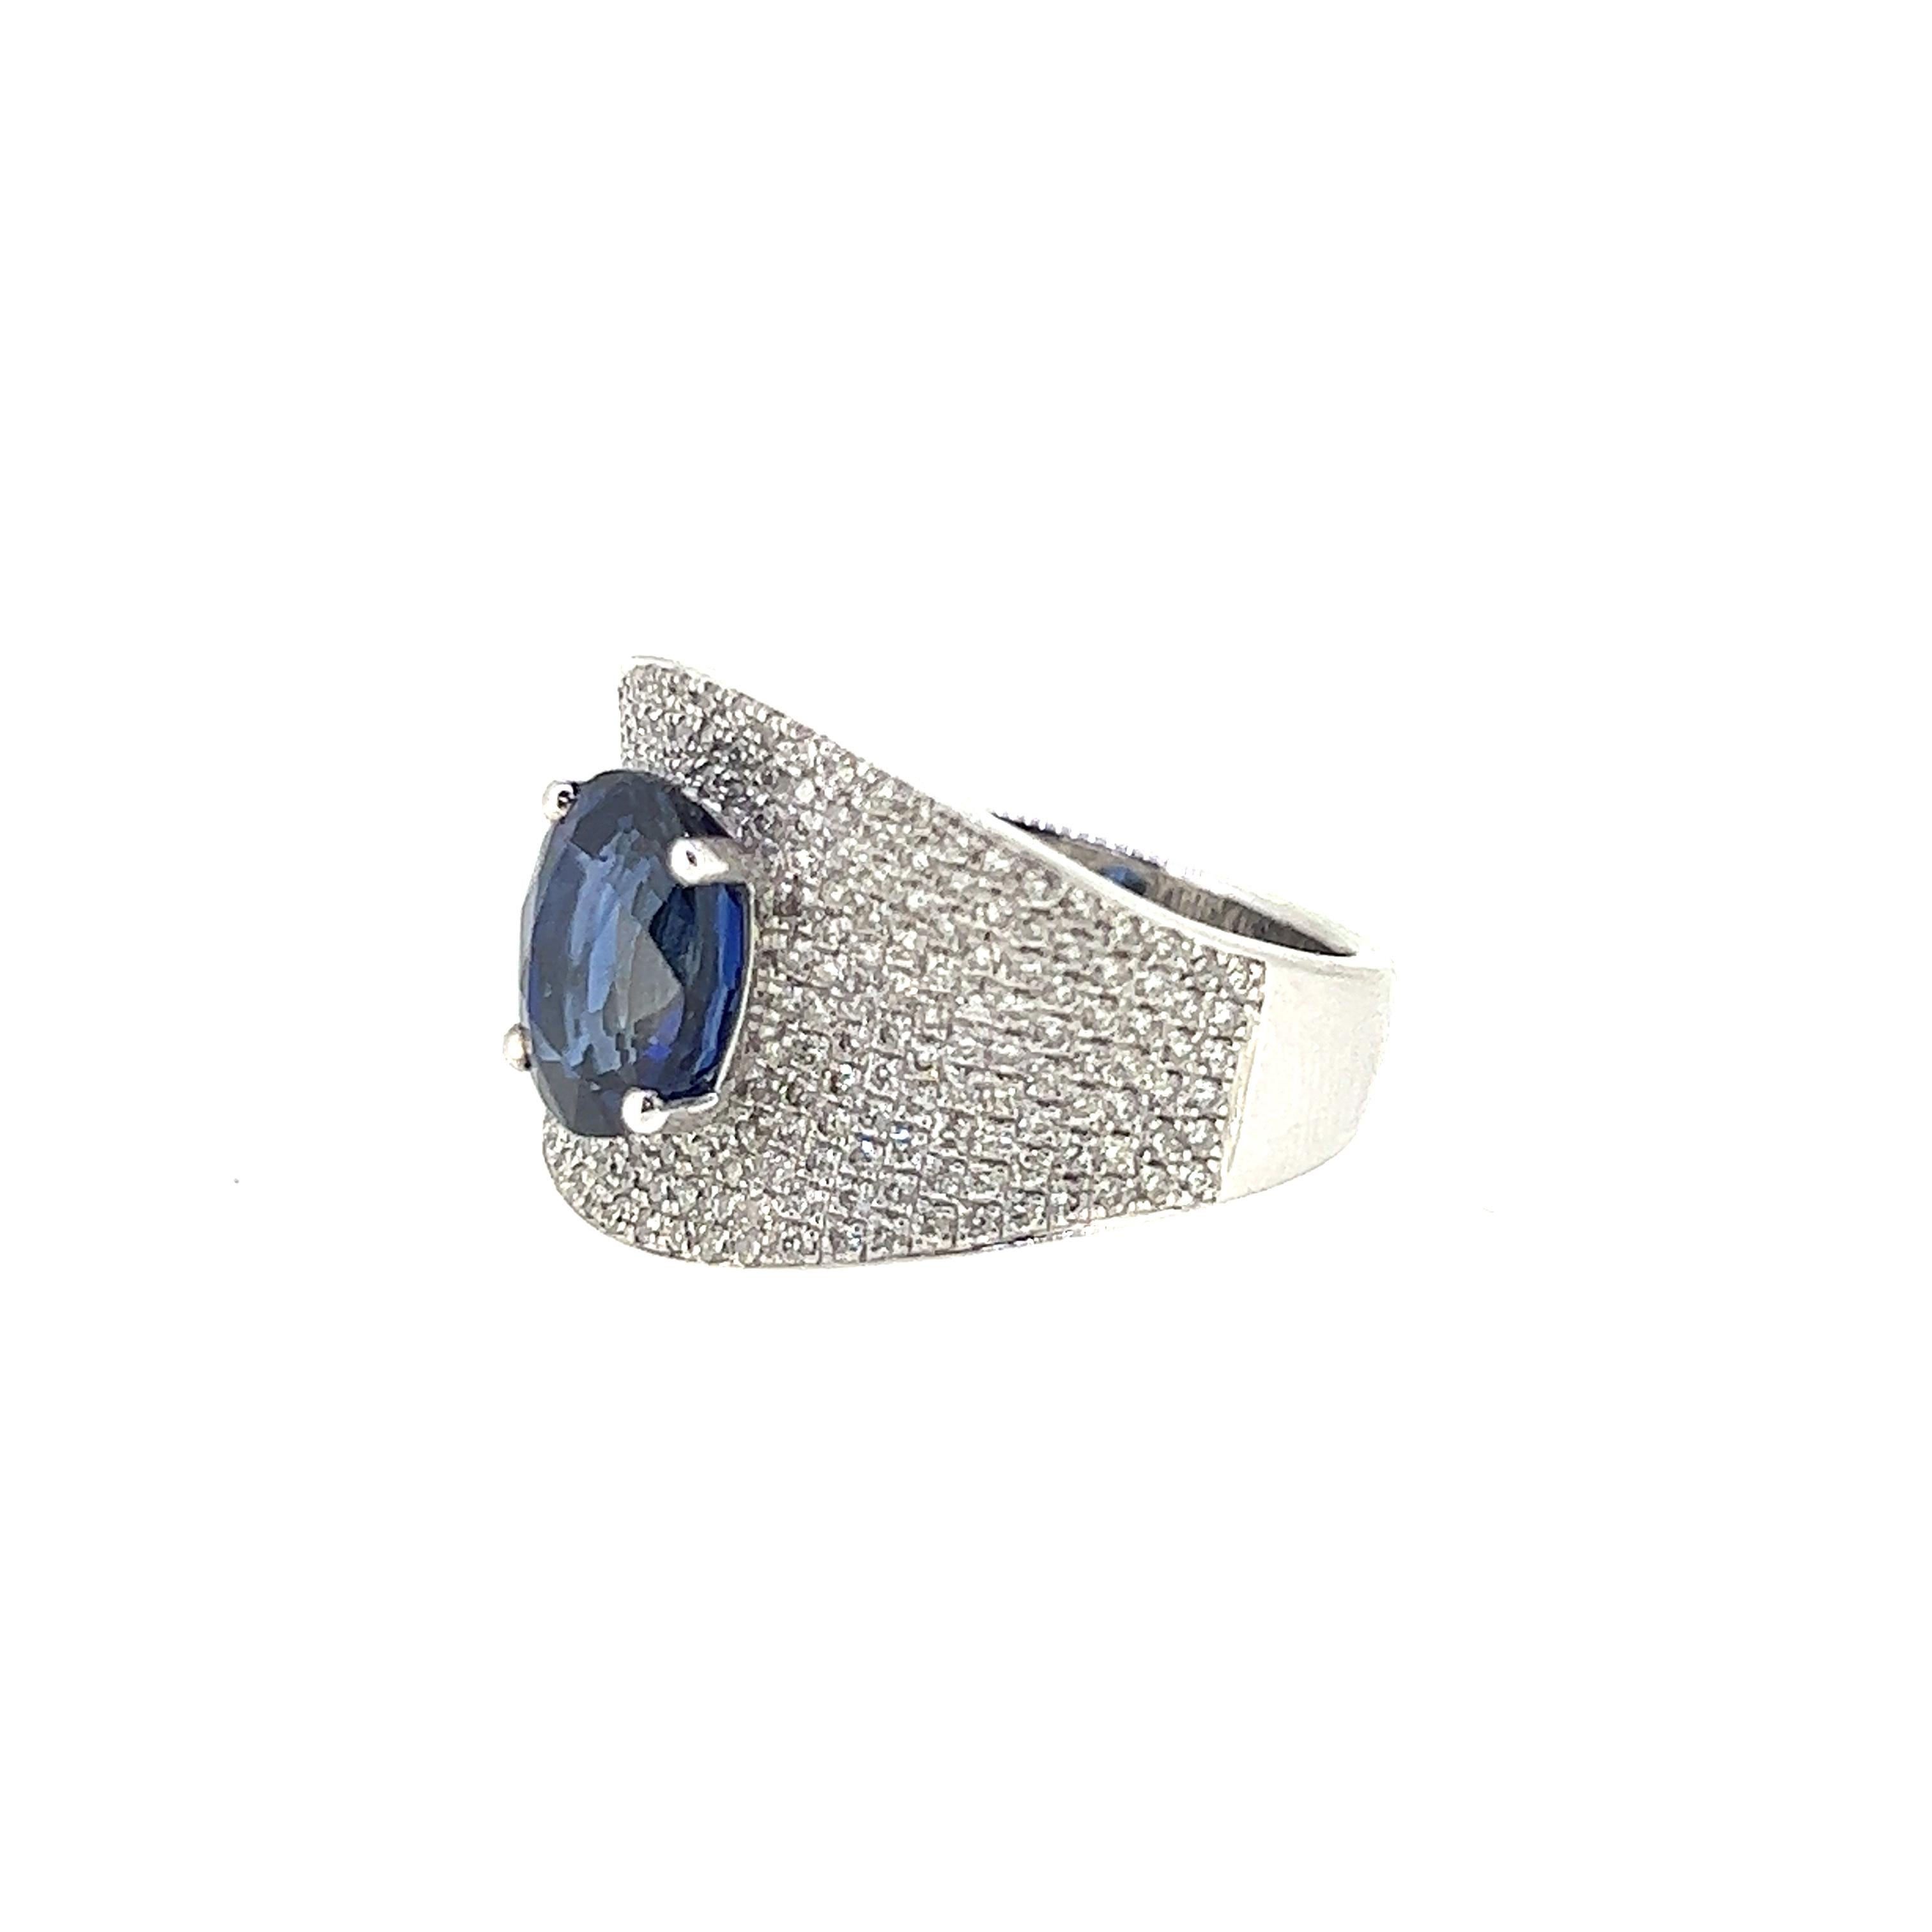 Oval Cut 3.94 Carat Sapphire and Diamond Ring Set on 18 Karat White Gold For Sale